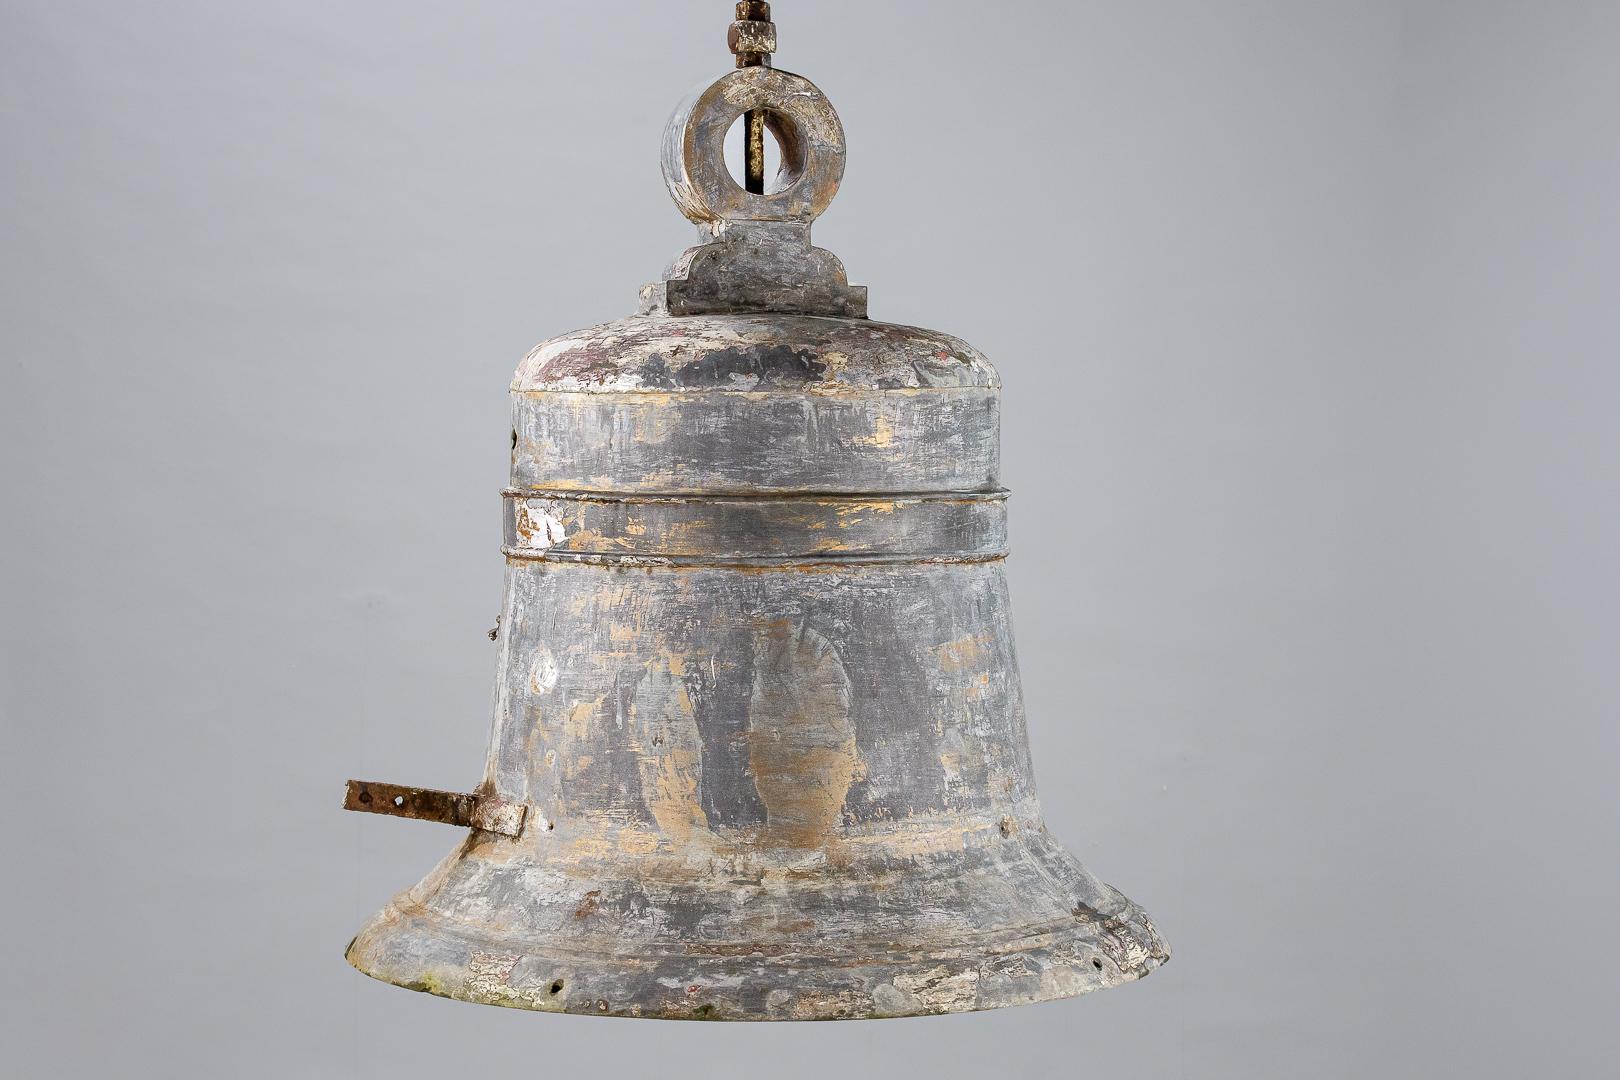 19th century zinc bell trade sign, Simply huge scale, remnant original gilding, dry weathered untouched surface. As expected wear and patina. Most likely a tavern sign. France 1890.
Dimensions: 97cm x 122cm x 97cm.
  